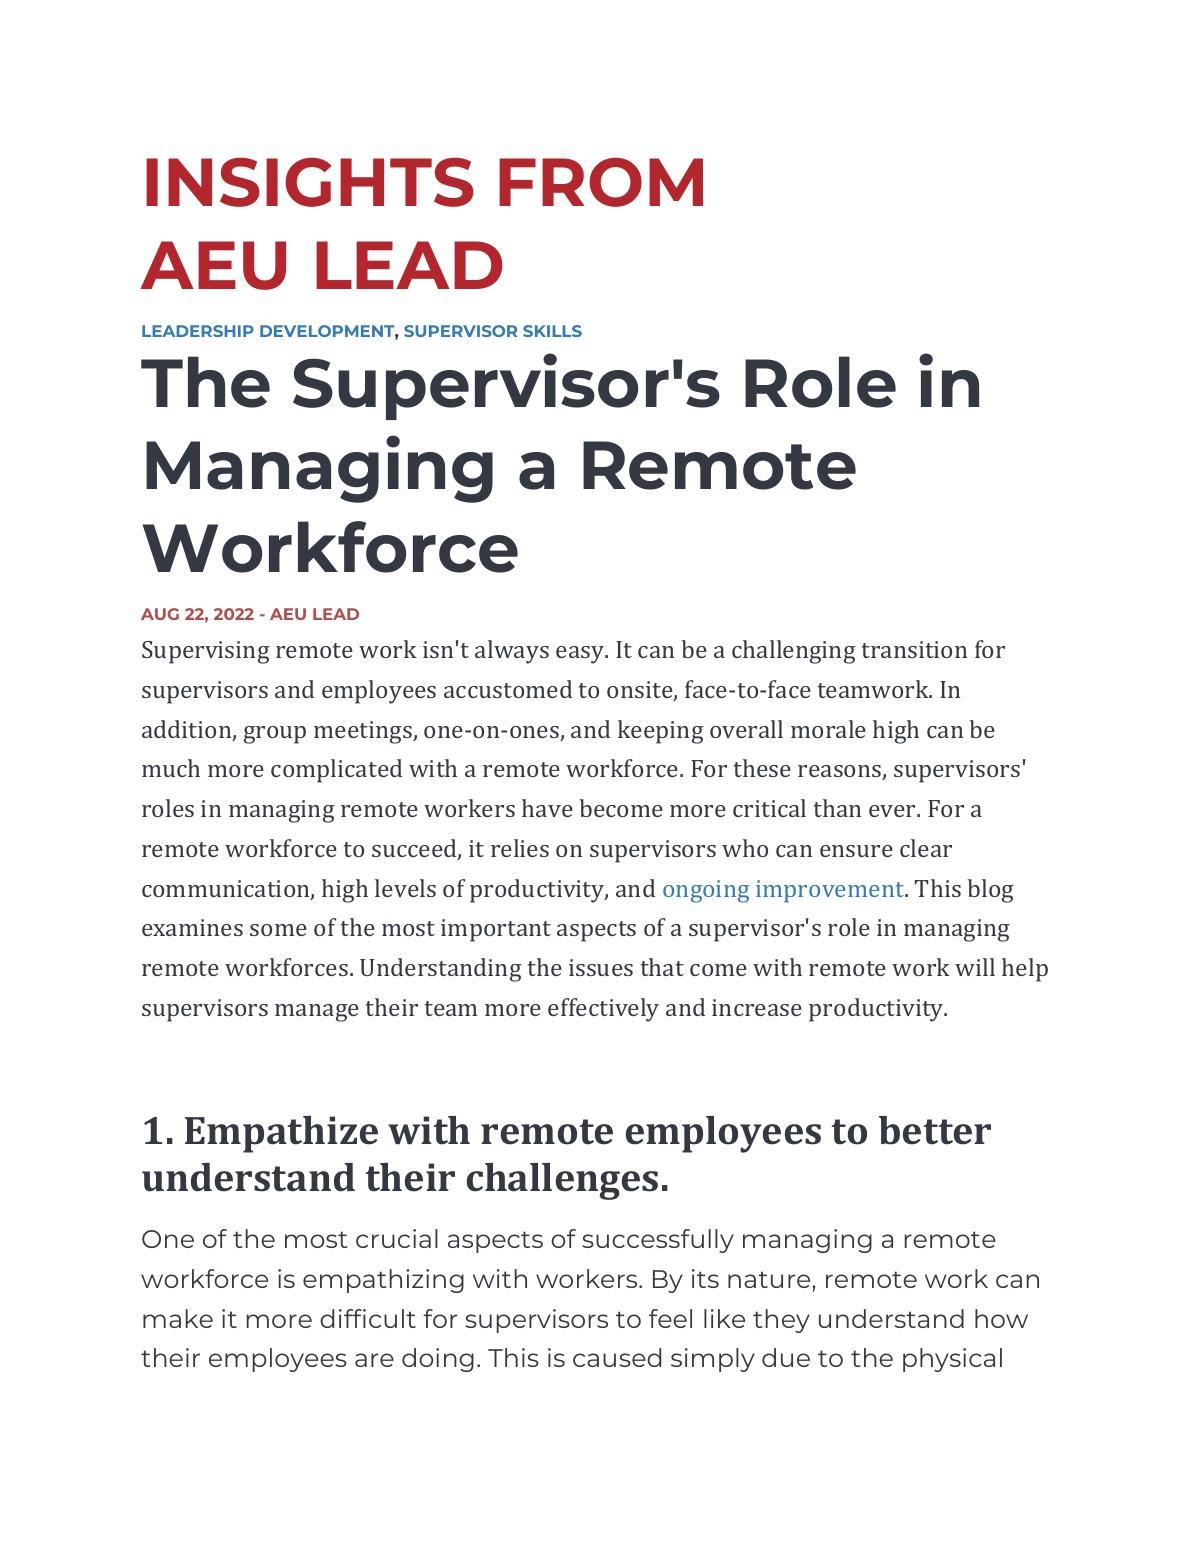 The Supervisor's Role in Managing a Remote Workforce